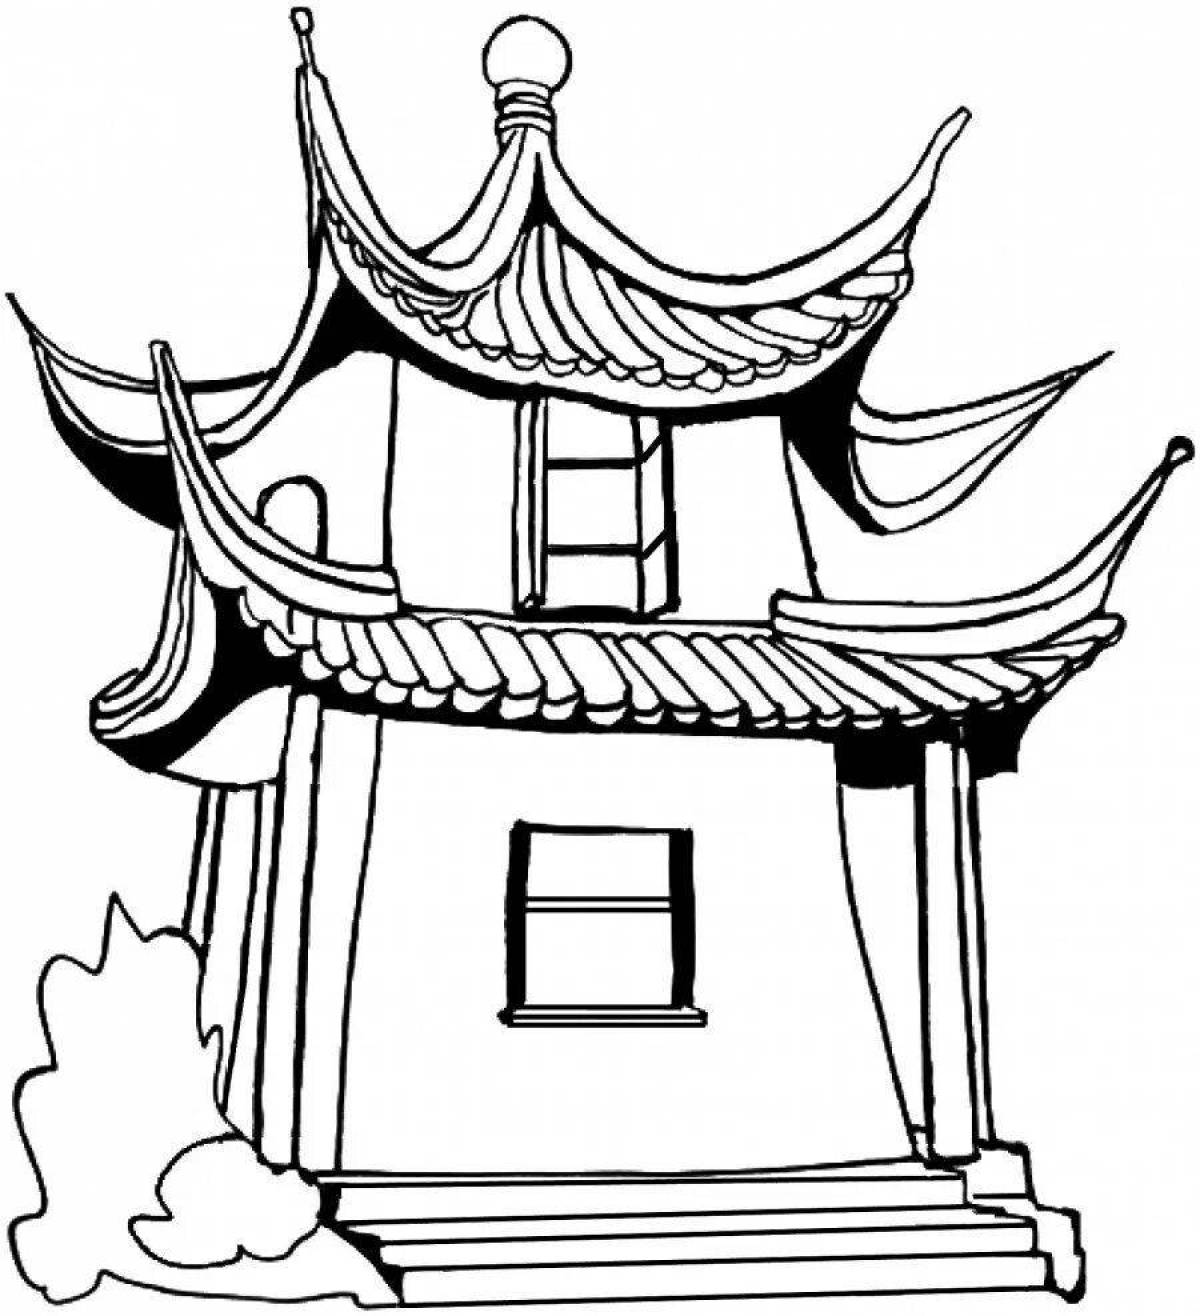 Coloring book bright chinese house